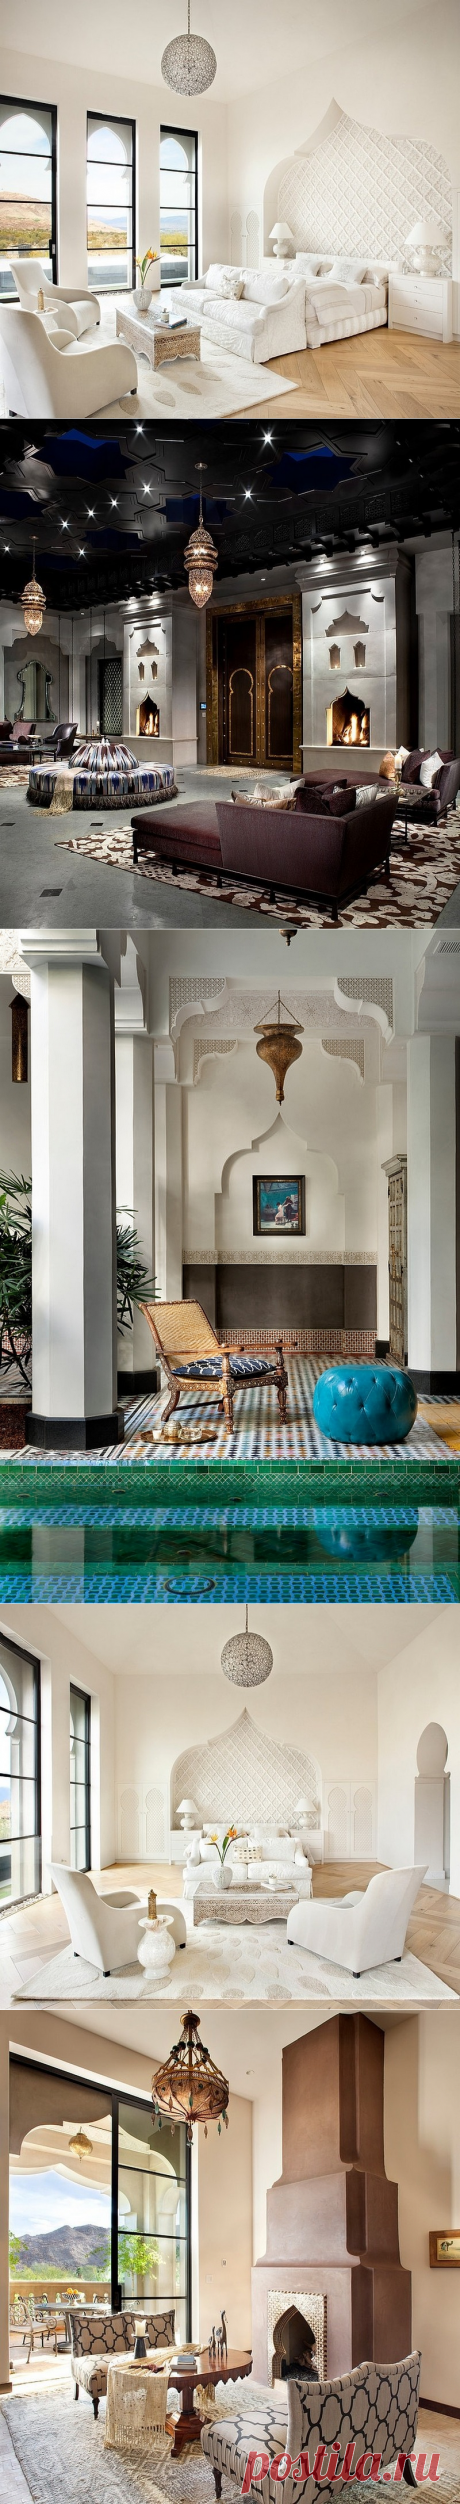 A Taste of Morocco: Stunning house in California has Moroccan themed construction and interior design